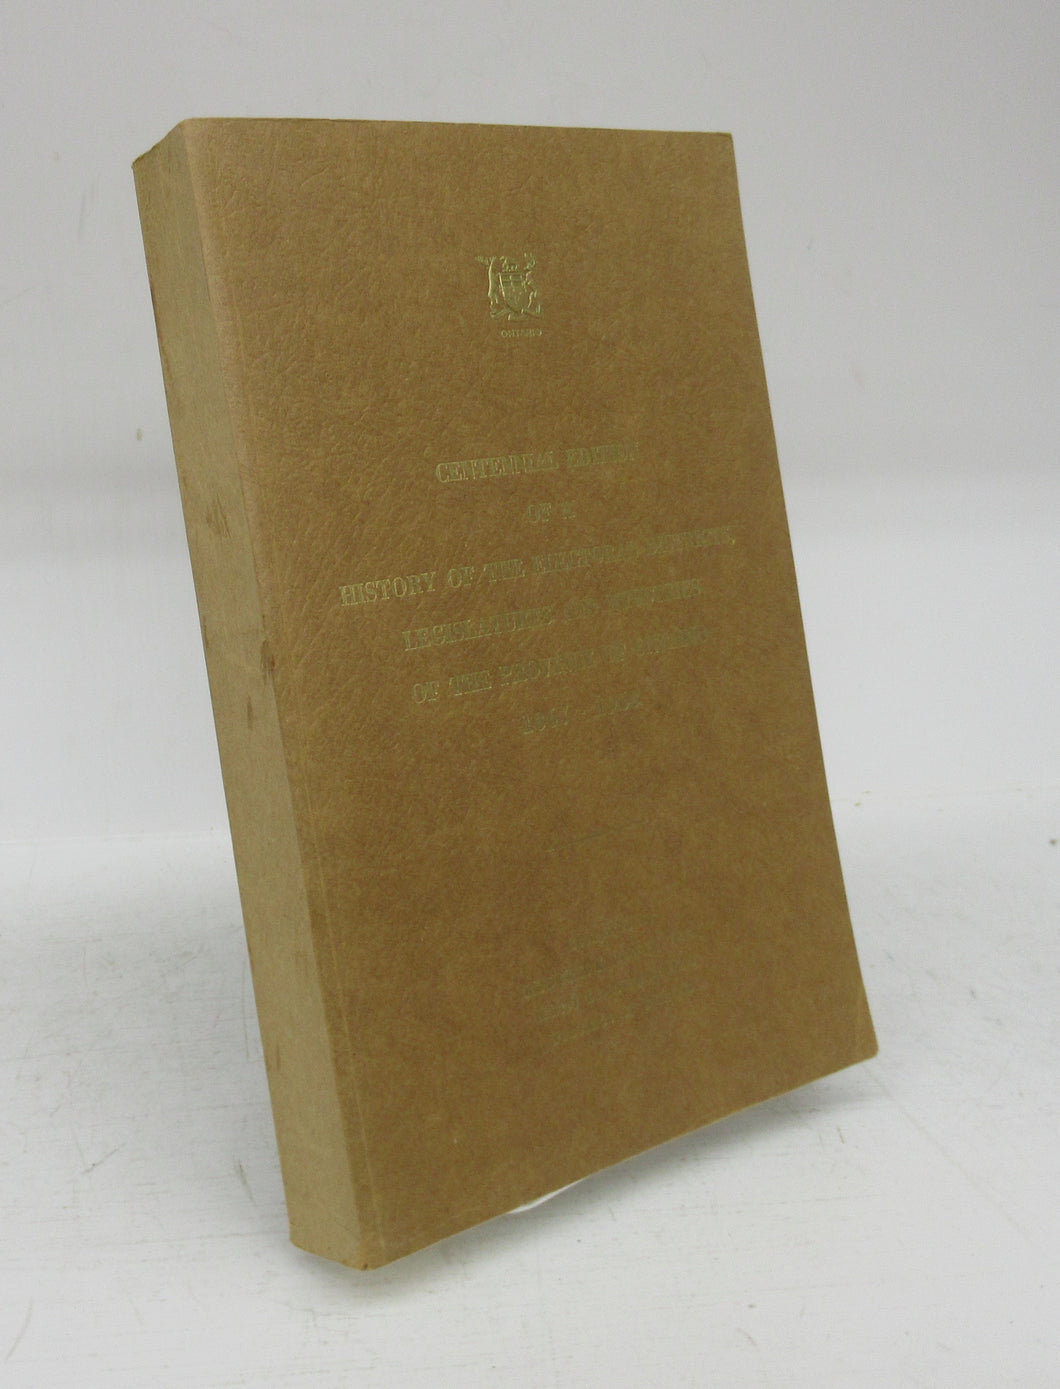 Centennial Edition of a History of the Electoral Districts, Legislatures and Ministries of the Province of Ontario 1867-1968